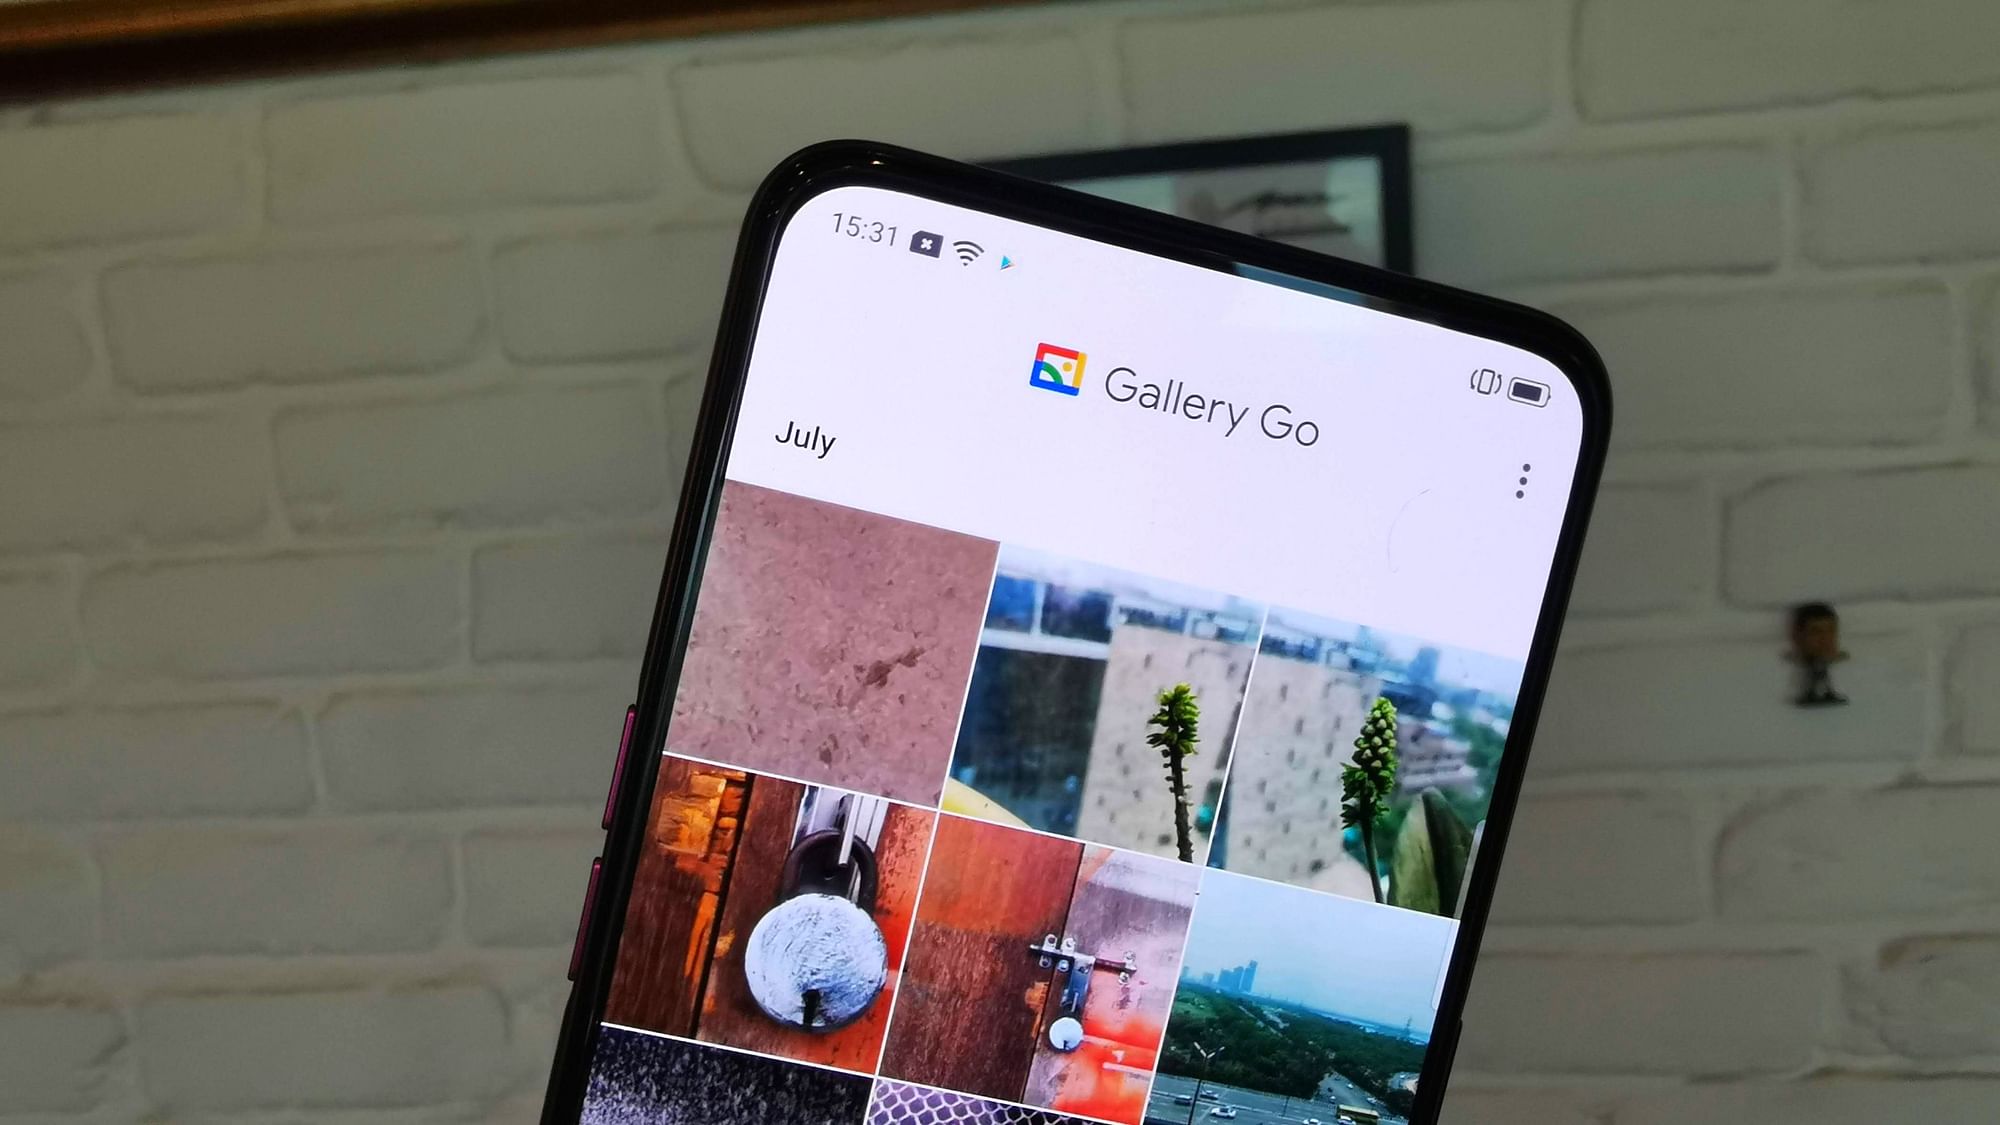 Gallery Go is part of Google’s mission to make entry-level devices more than useful.